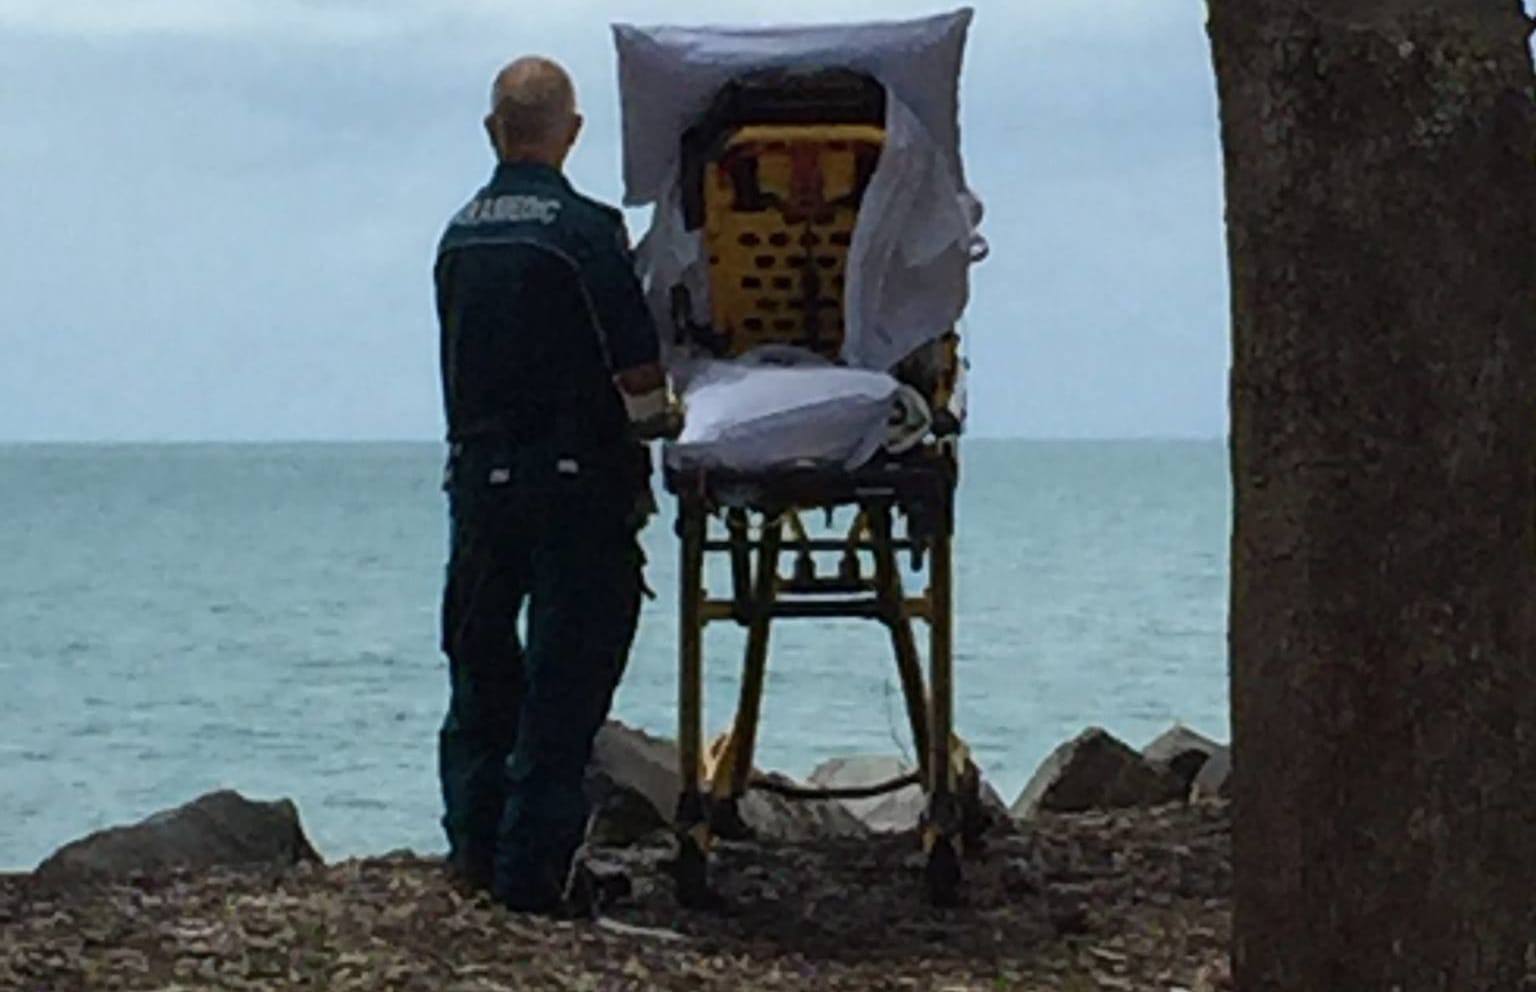 Queensland Ambulance Service paramedics brought the terminally ill woman to see the beach again.